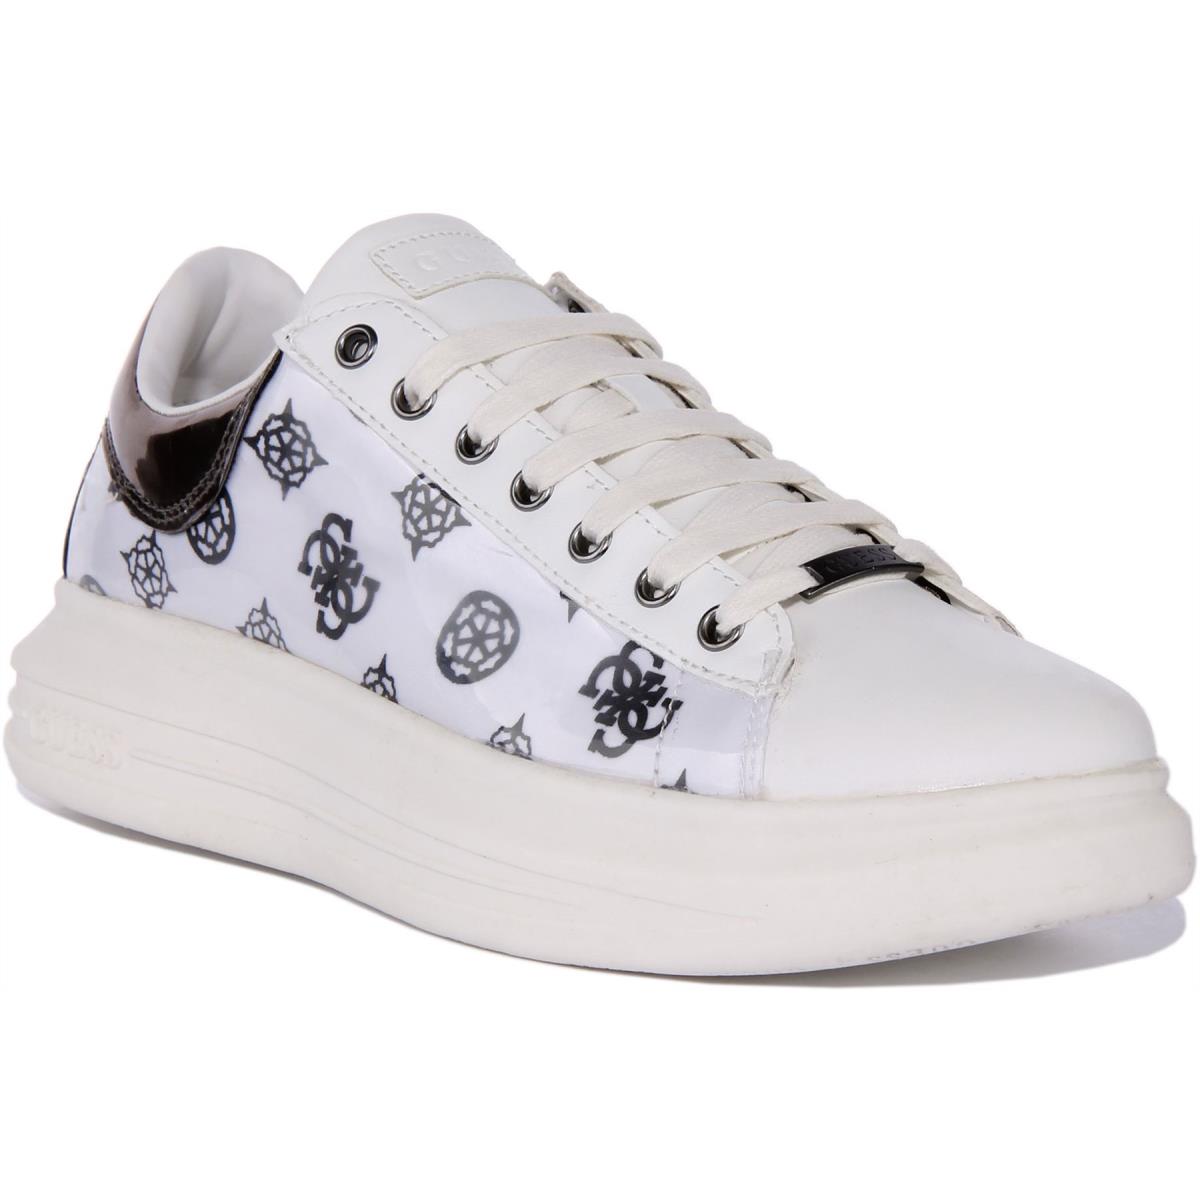 Guess Fl5Vibfab12 Vibo Womens Lace Up Sneakers In White Silver Size US 5 - 11 WHITE SILVER